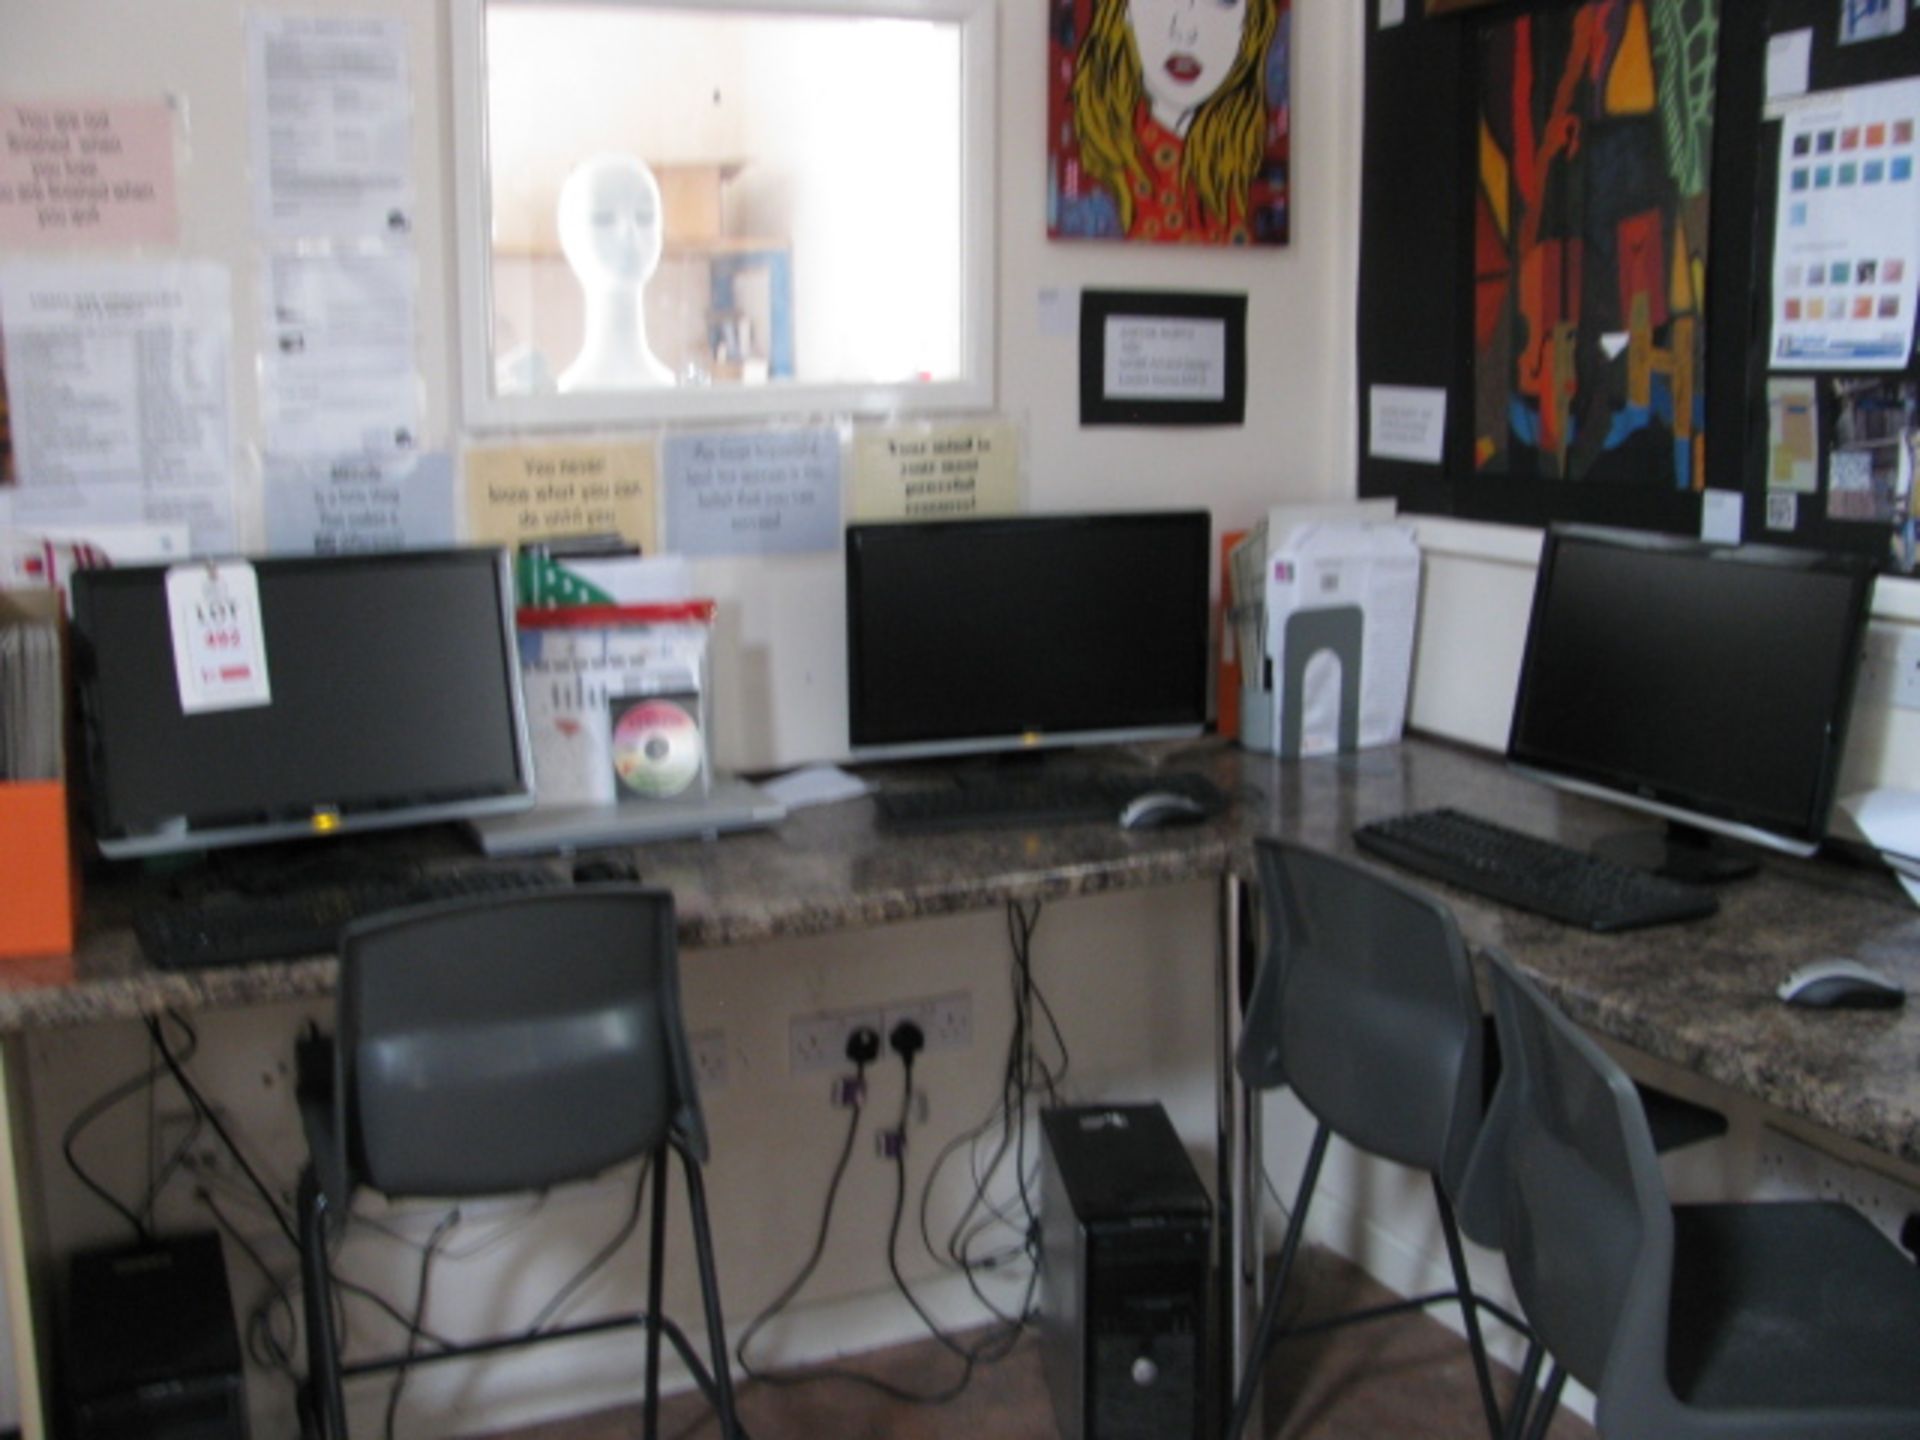 Three Dell Optiplex personal computers each with widescreen monitor, keyboard and mouse